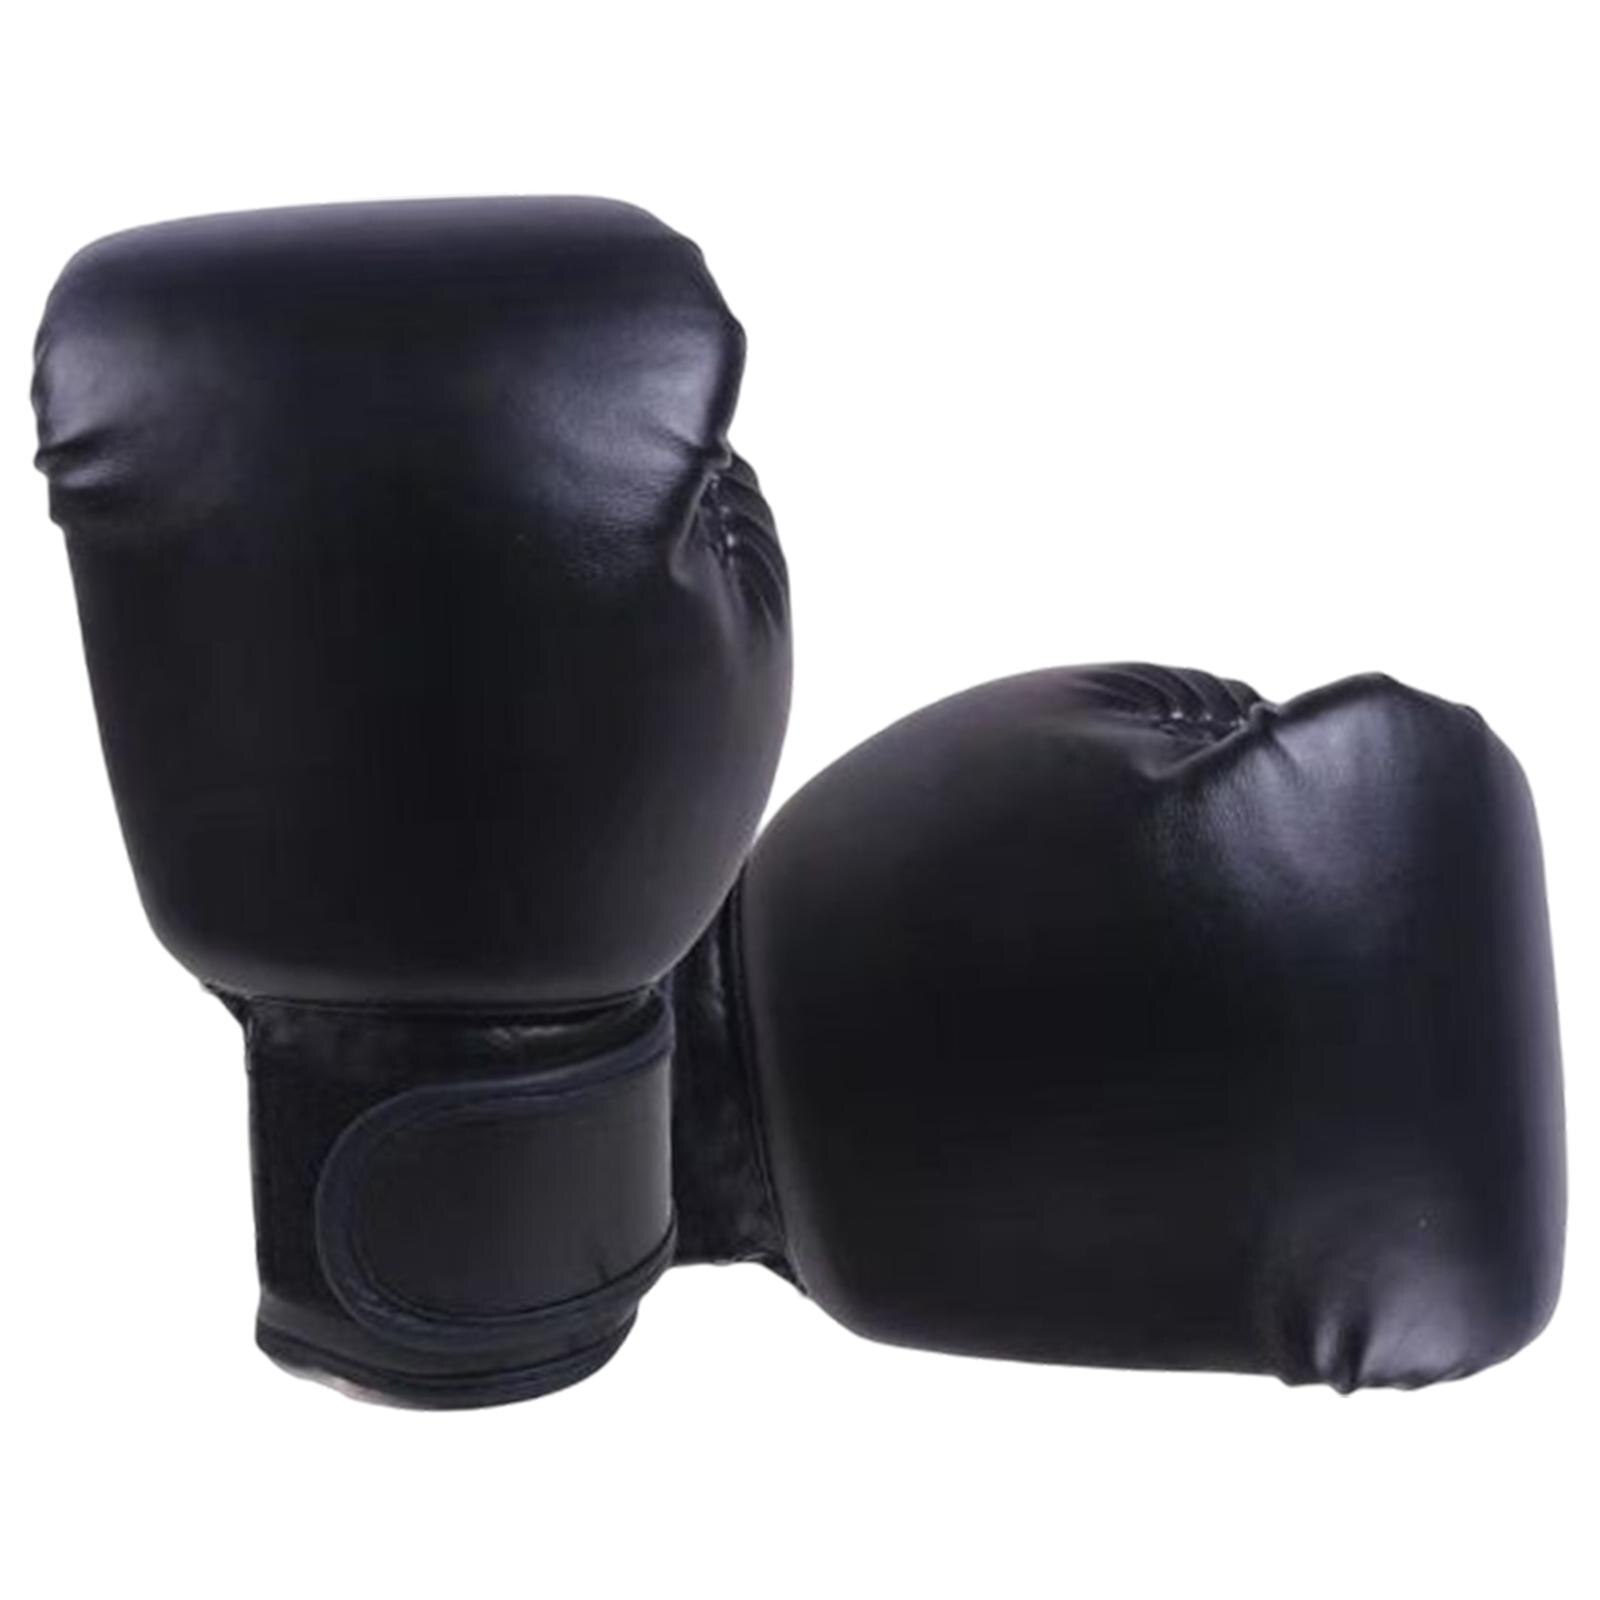 Boxing Gloves boxeo en tailandia Thai Kick Boxing Leather Sparring Heavy Bag Workout MMA Gloves   Adult and Children